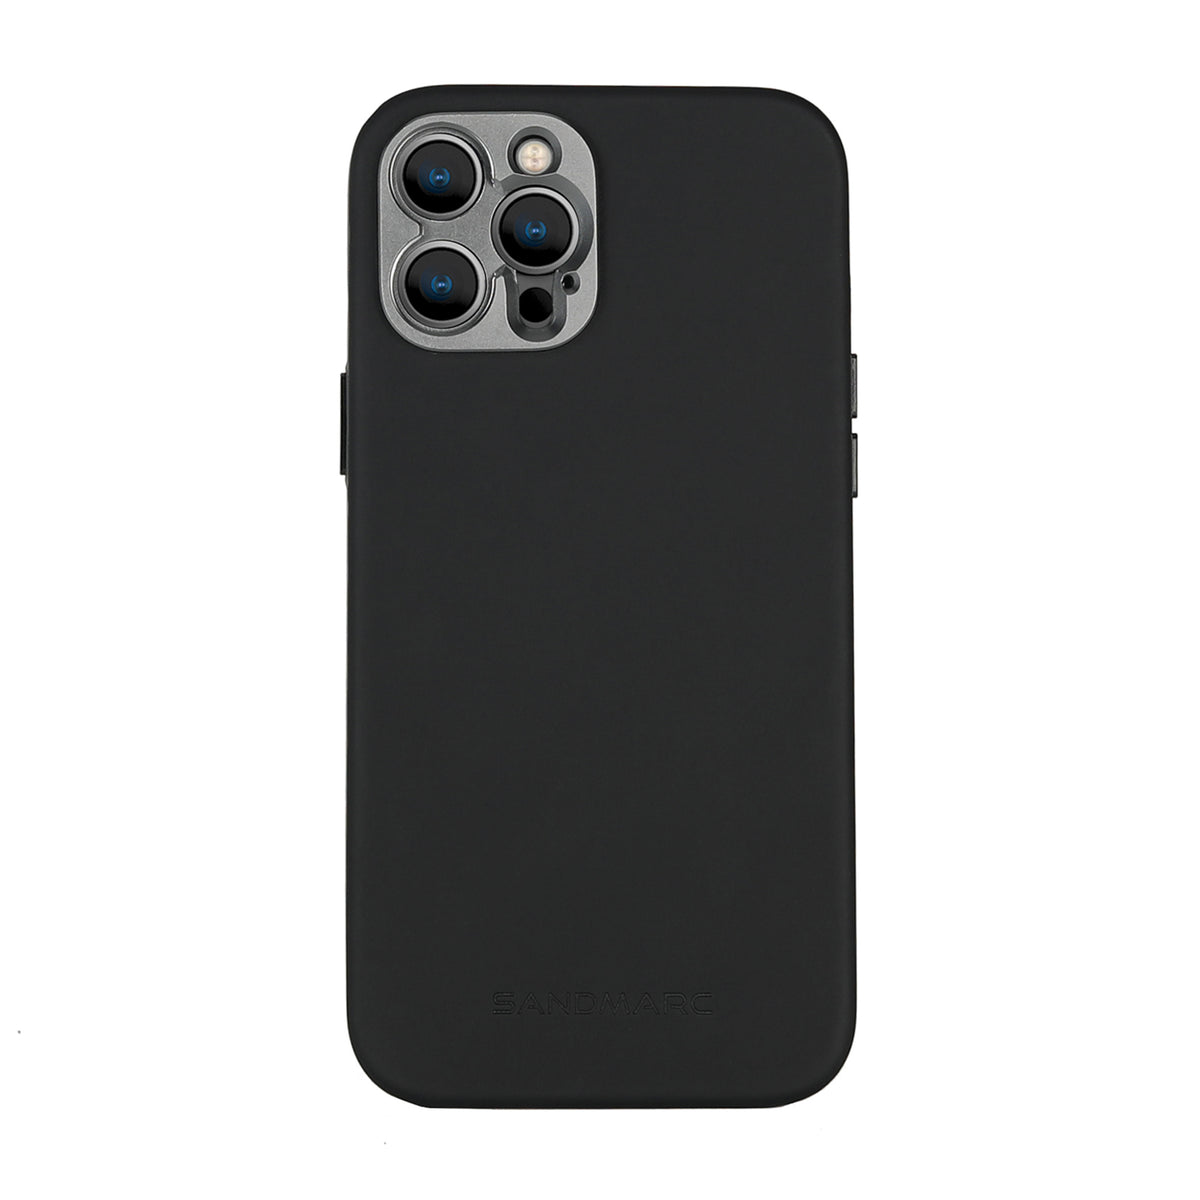 iPhone 12 Pro Max Case - works with MagSafe